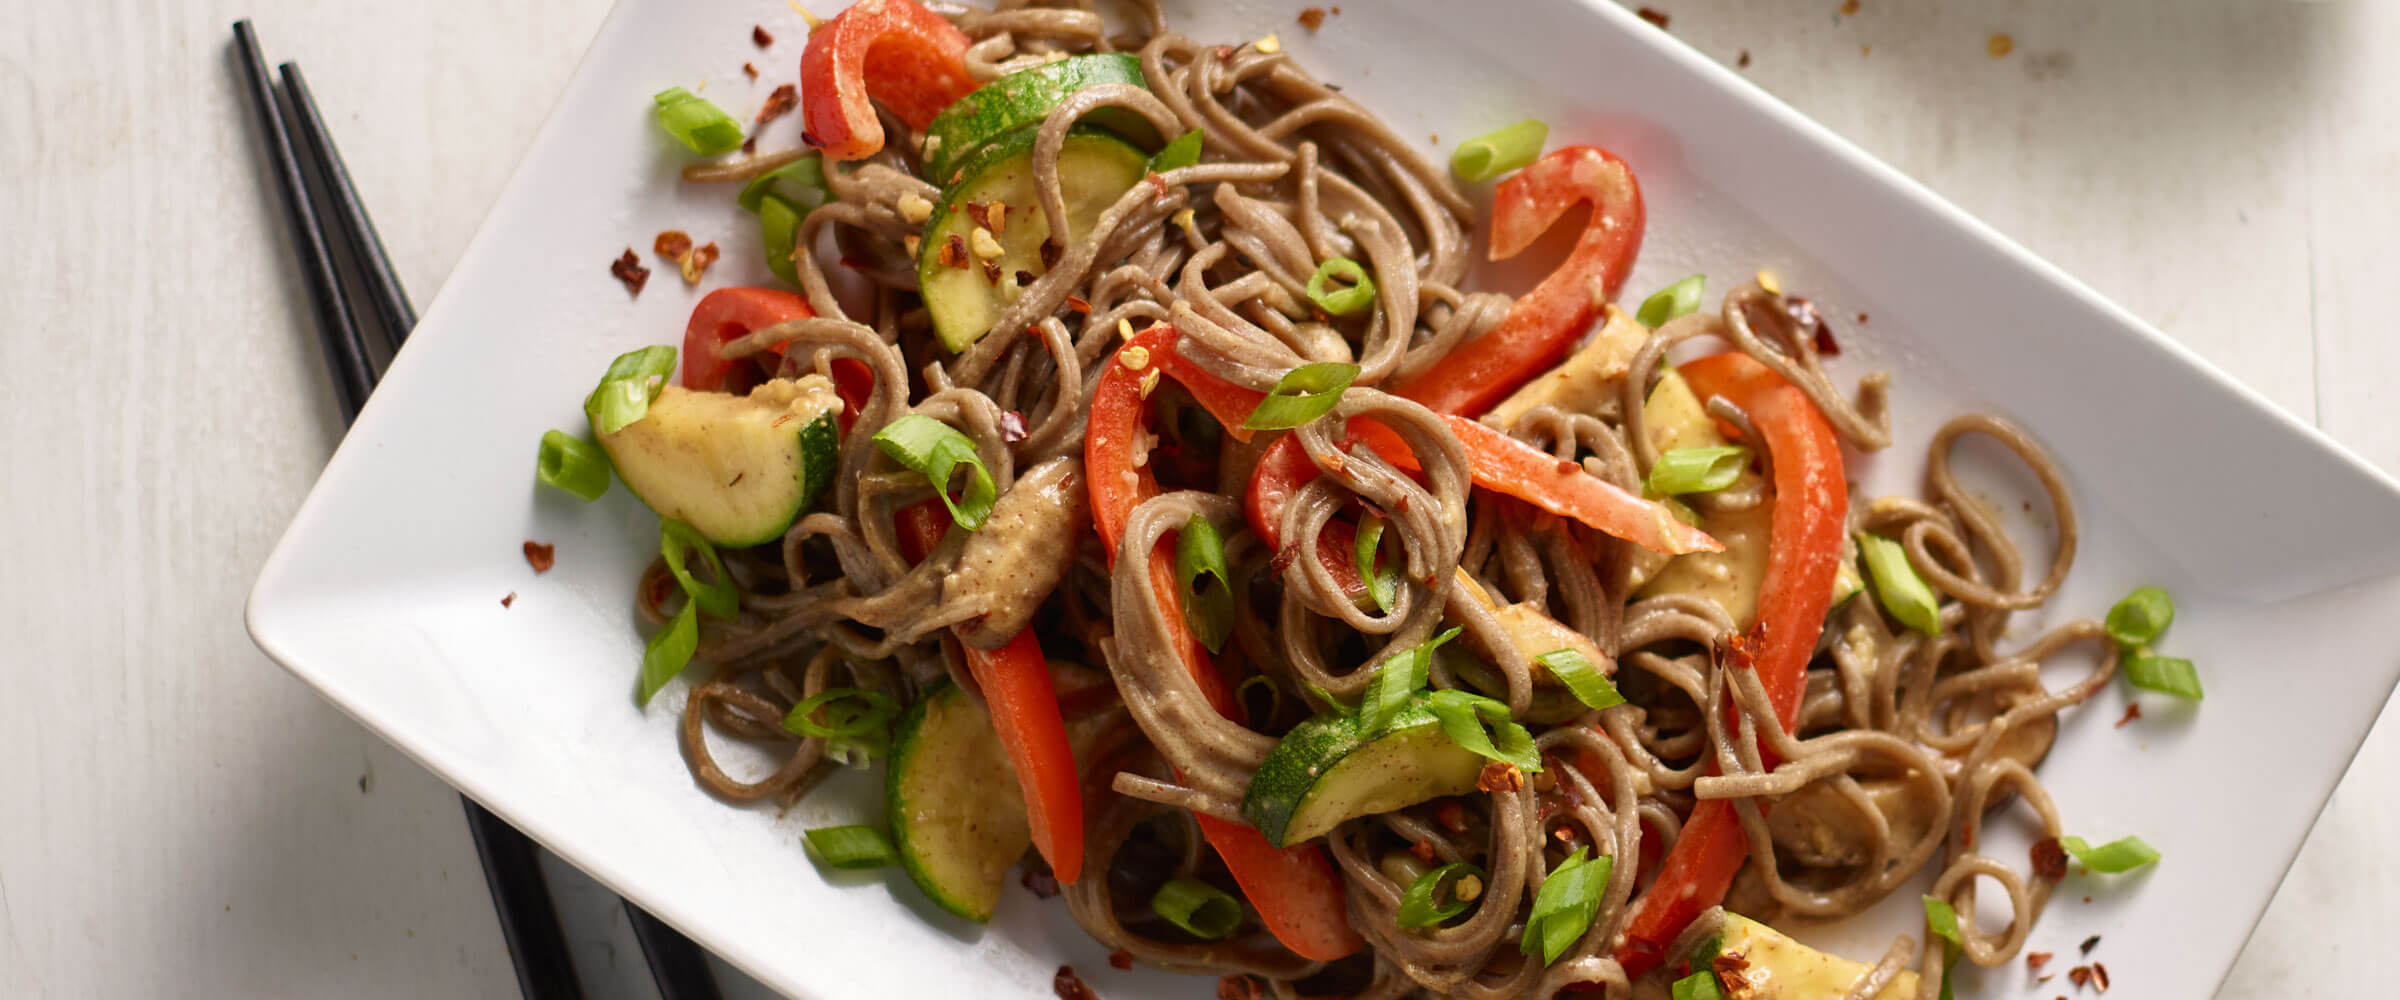 Spicy Asian Almond Noodles